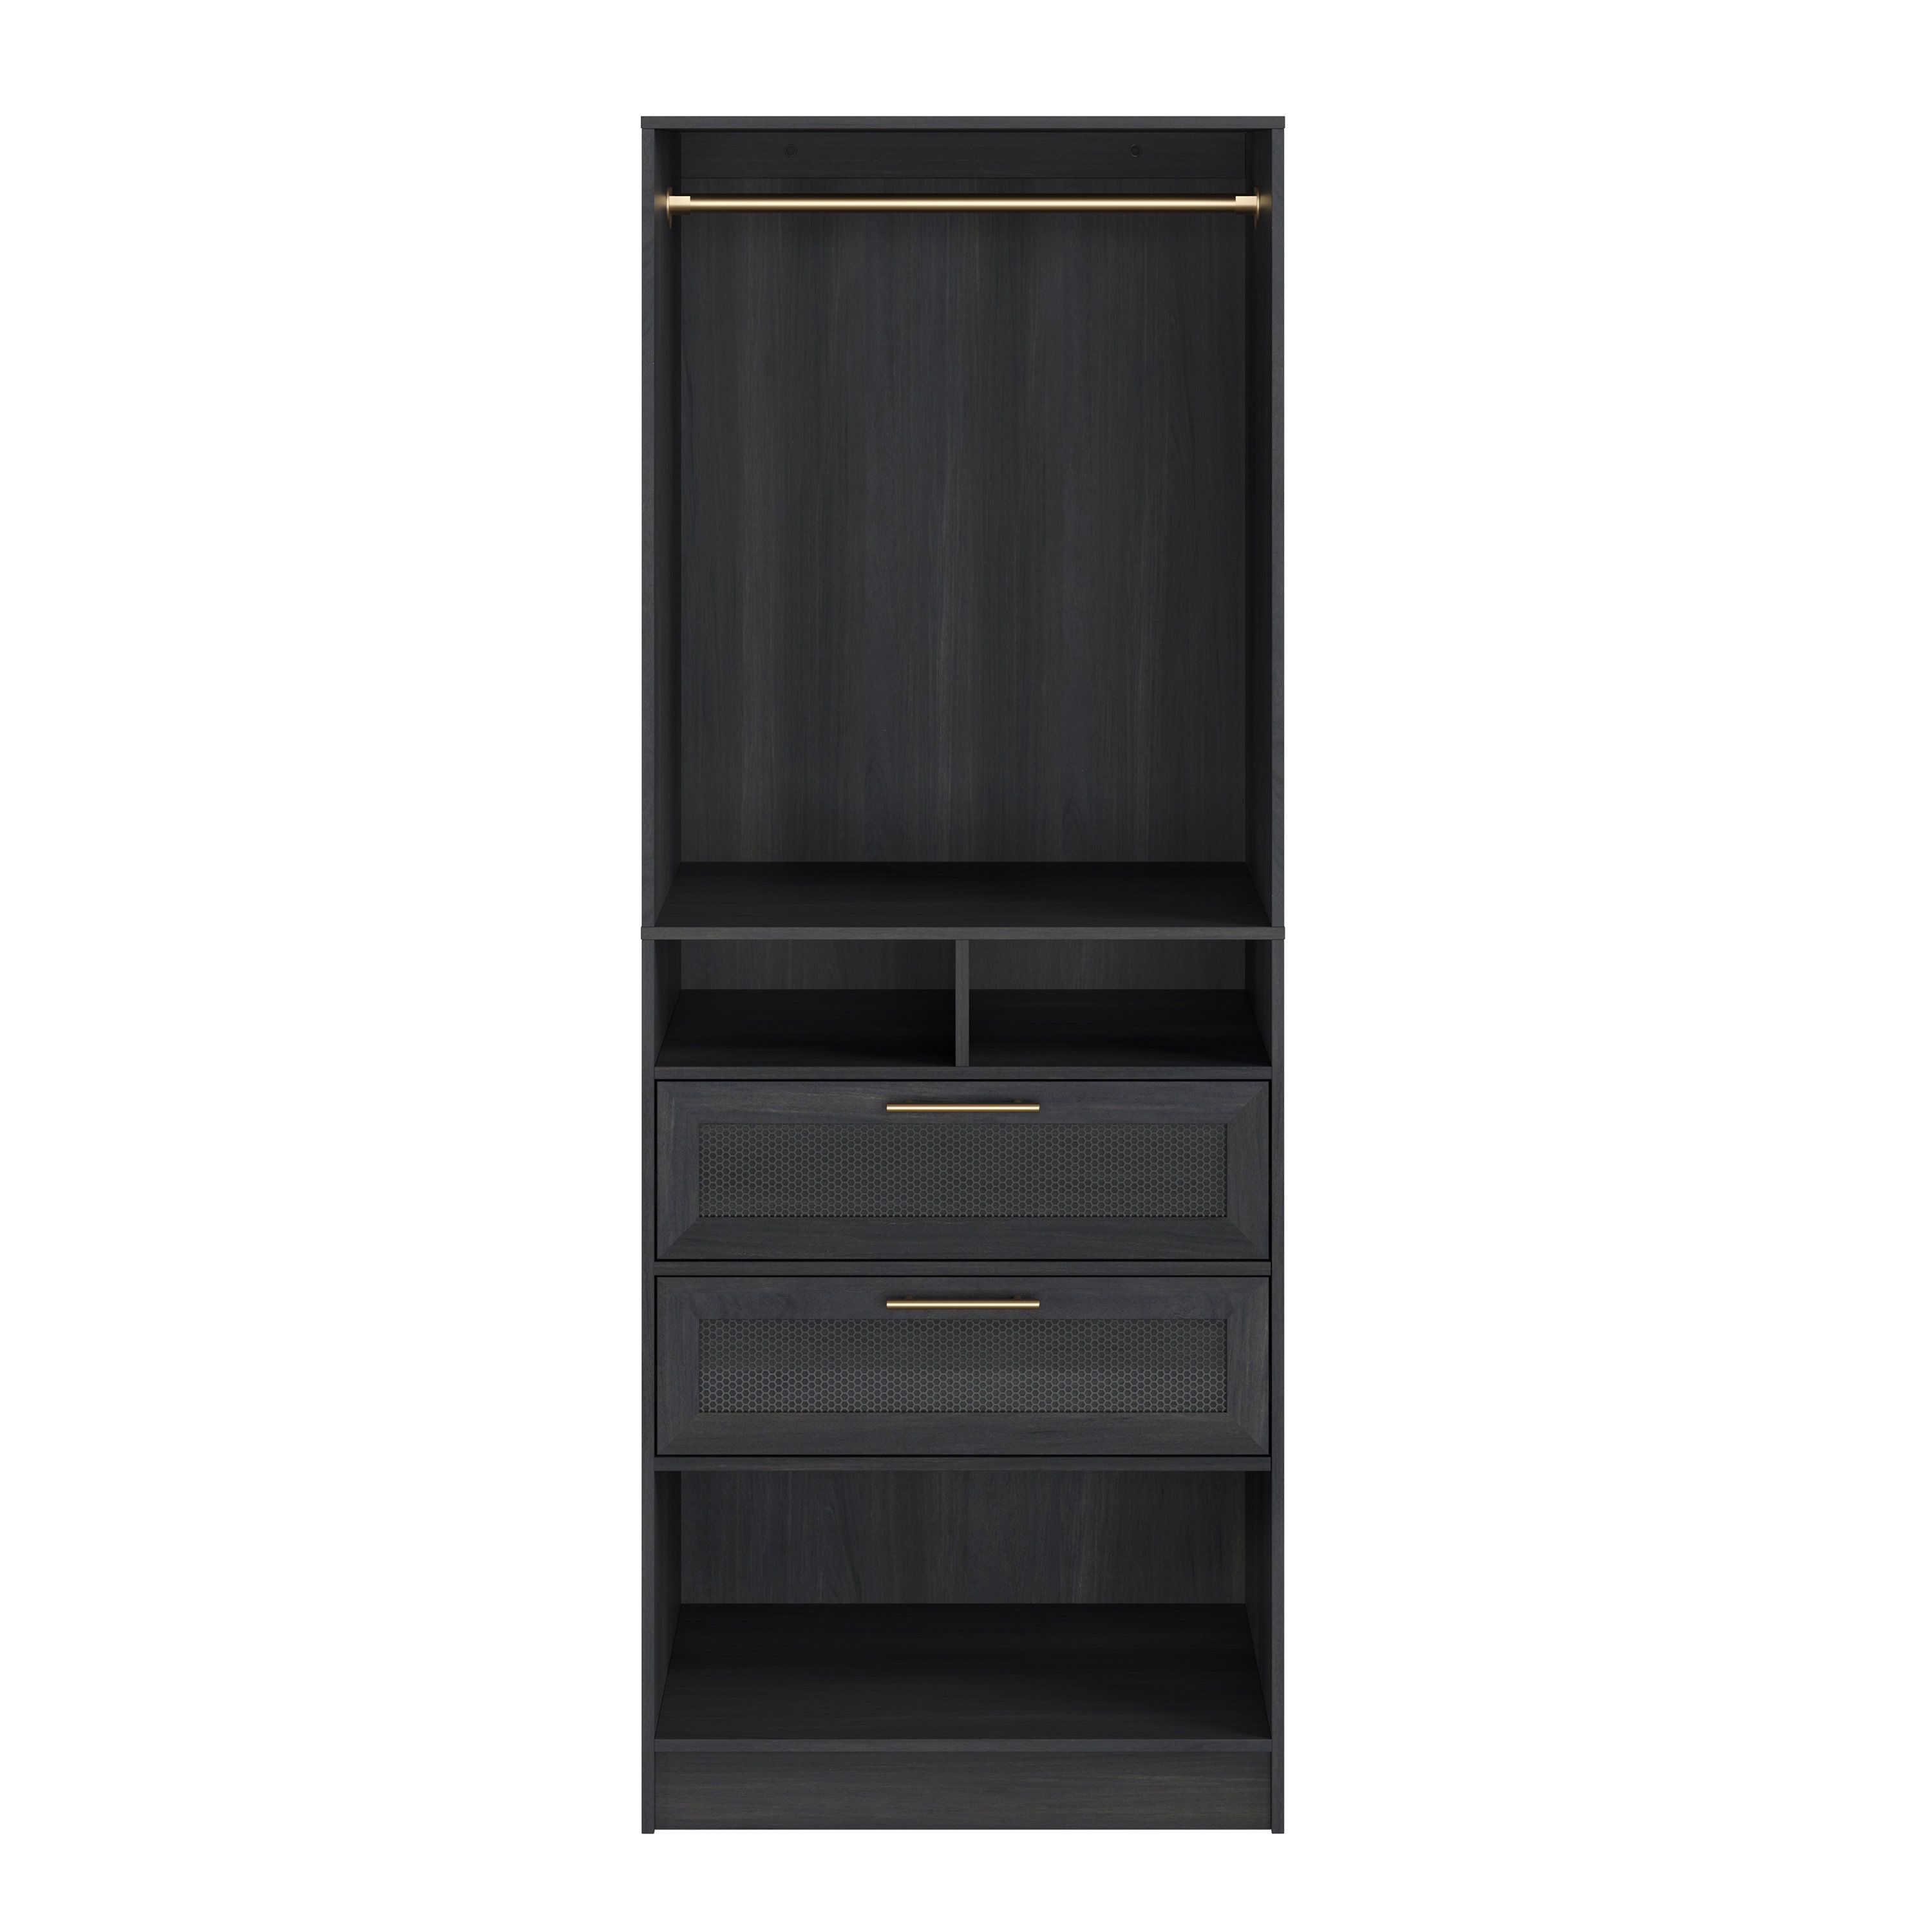 Scott Living Robin 30" Wardrobe Closet With 2 Drawers And 4 Shelves With  Clothes Rod Closet System & Reviews | Wayfair Throughout 2 Separable Wardrobes (Gallery 10 of 20)